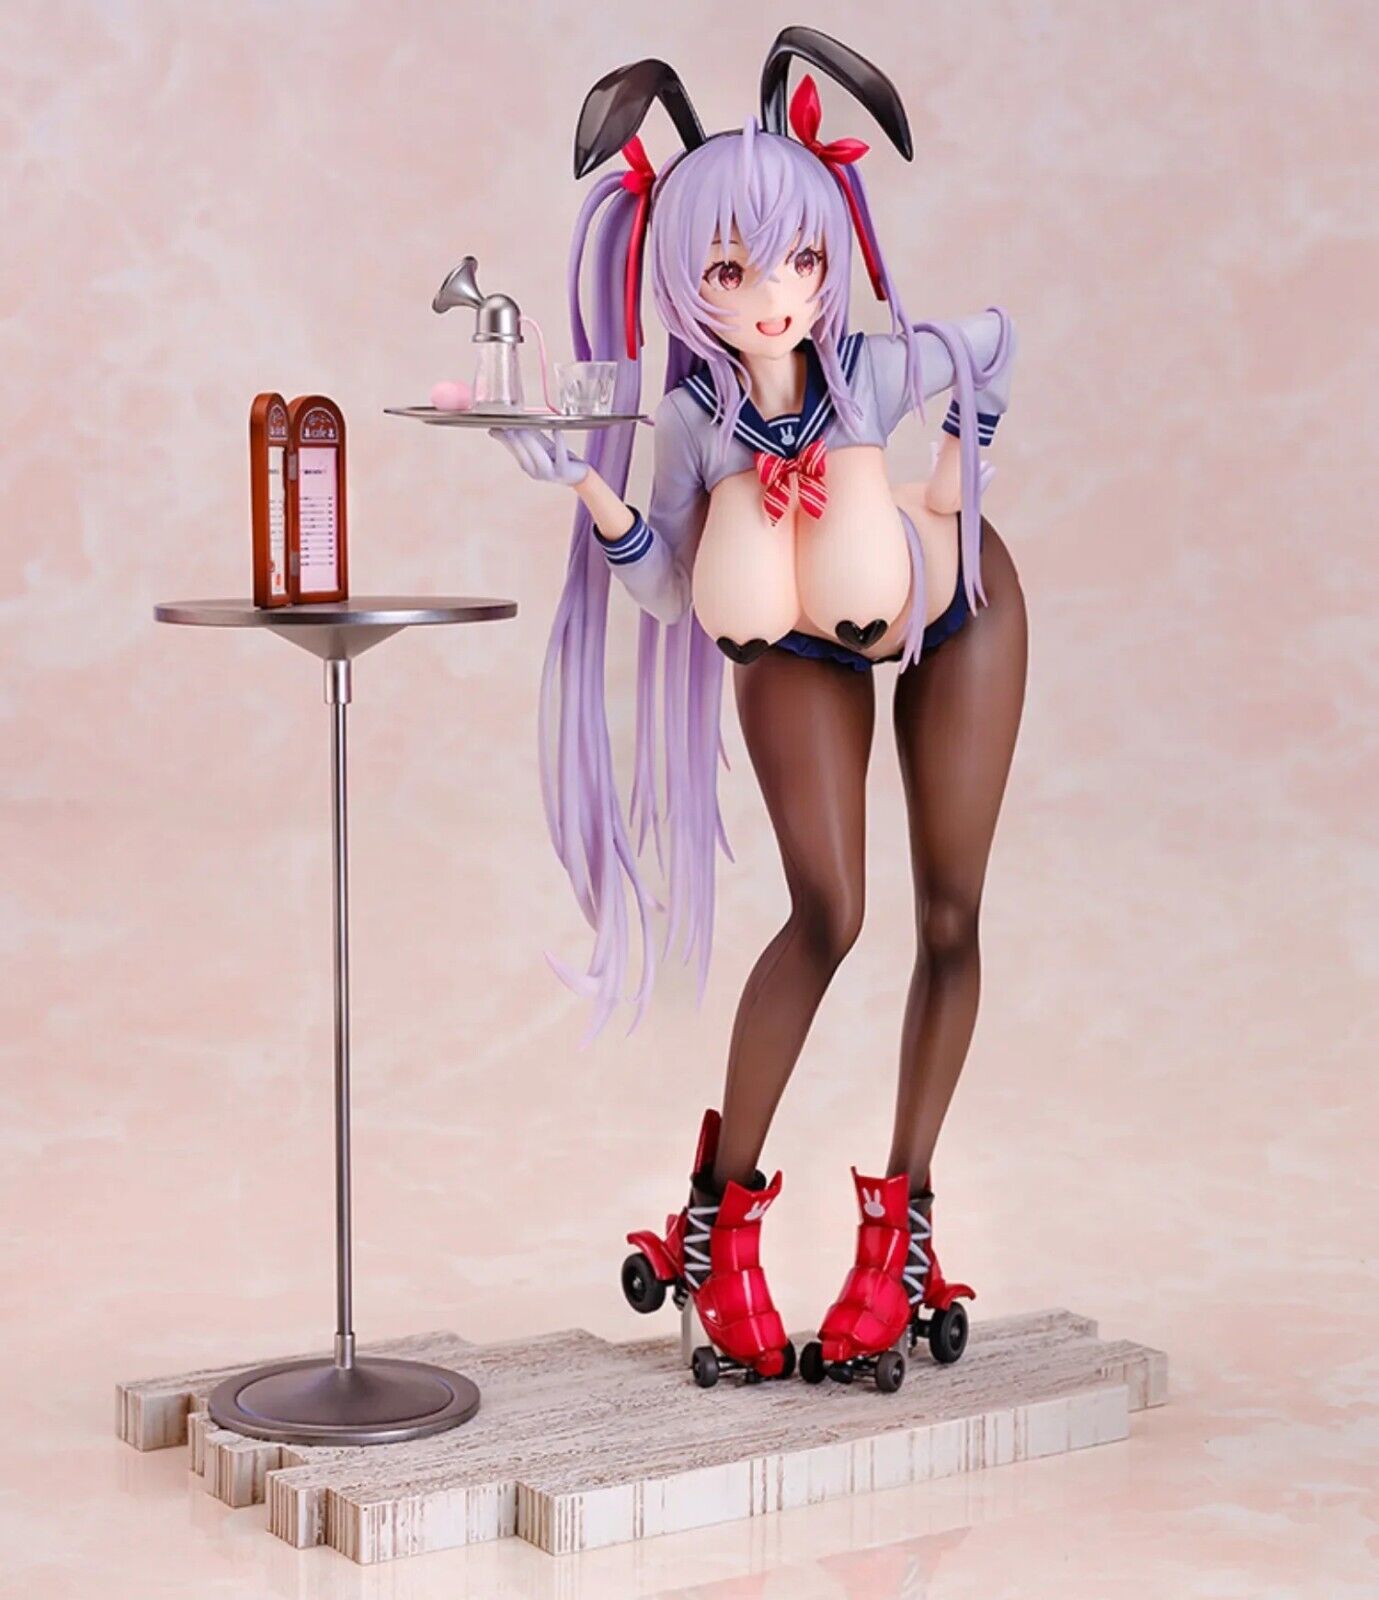 ANIME HENTAI BUNNY Cute Sexy Girl PVC Hot Action Figure Collection Model Doll